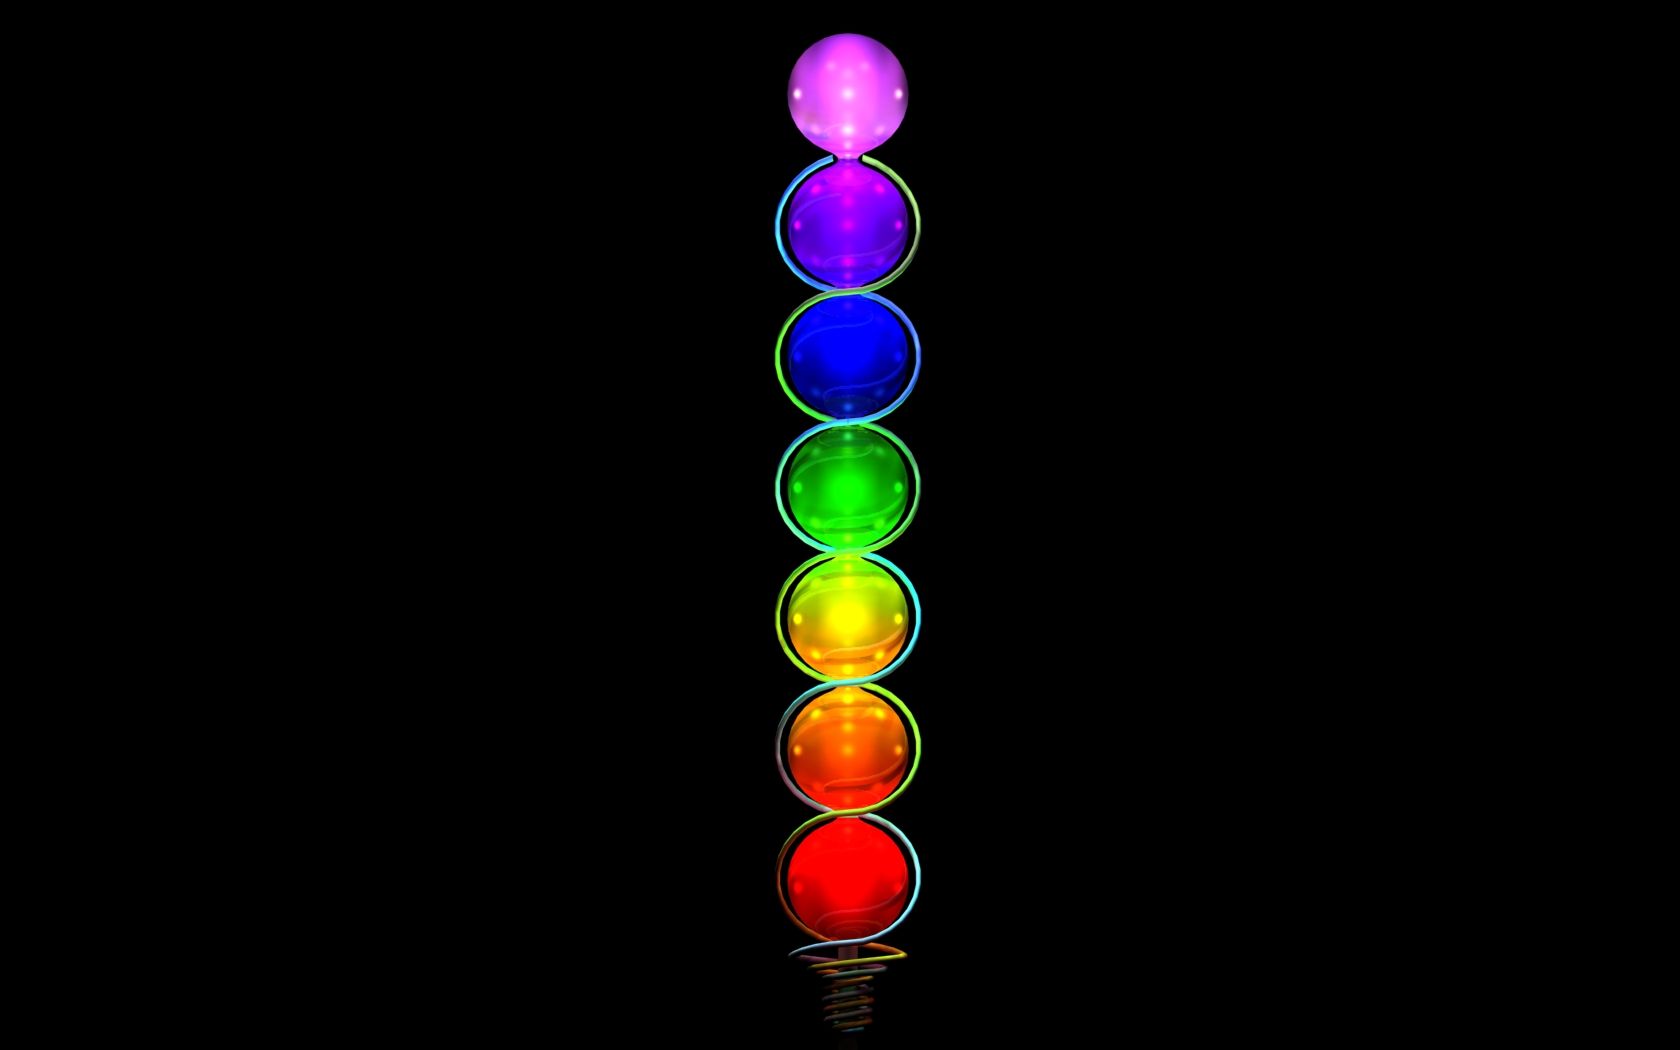 Chakra Iphone Wallpapers